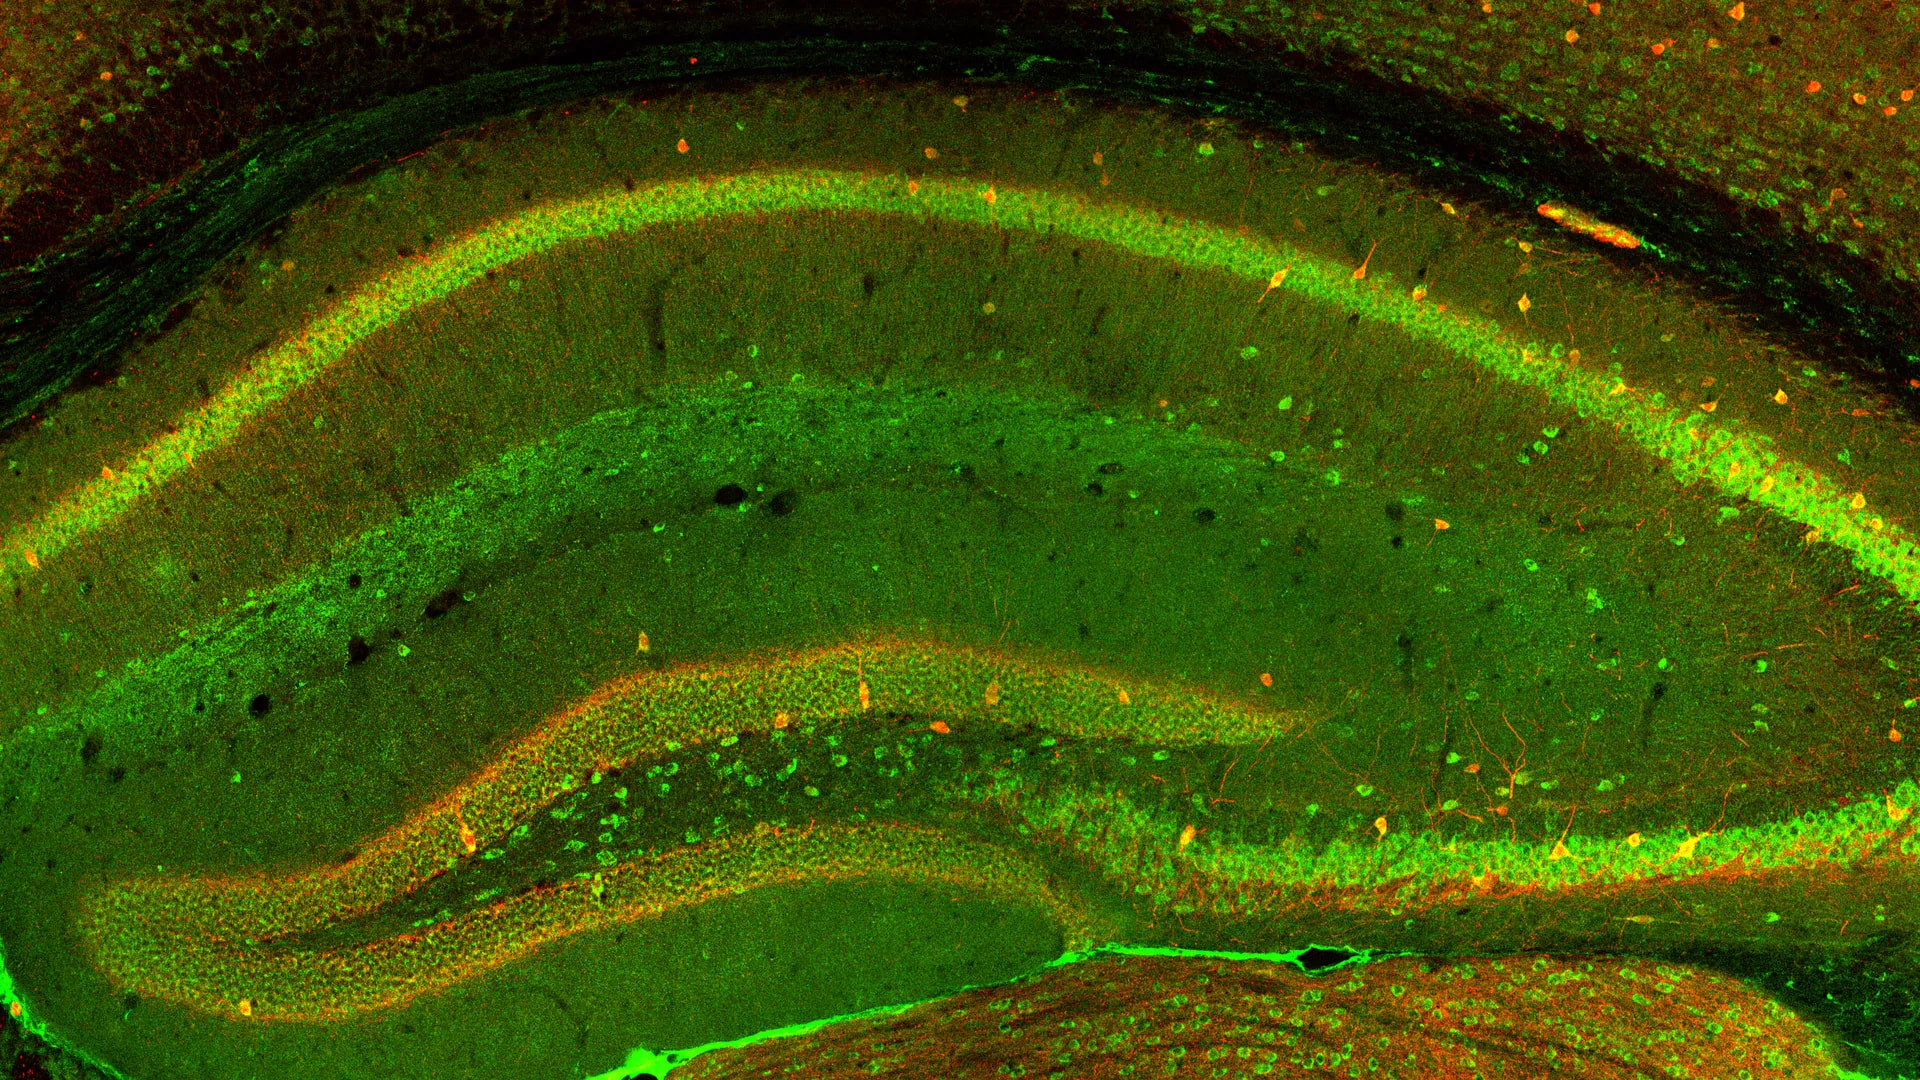 Cover image for "Neuronal Pathways Affecting Glial Function"